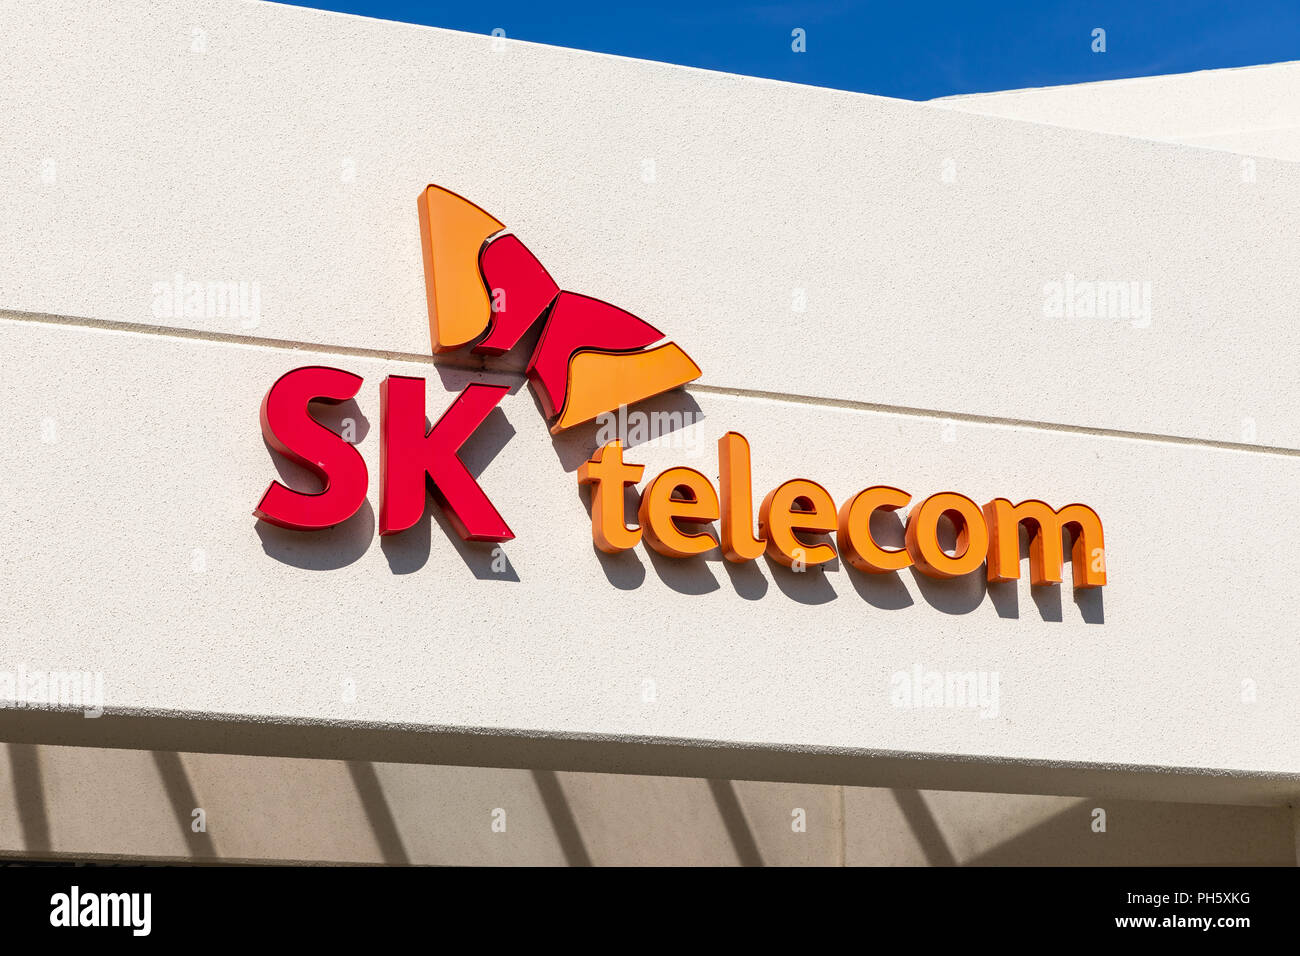 Sk Telecom Americas High Resolution Stock Photography and Images - Alamy